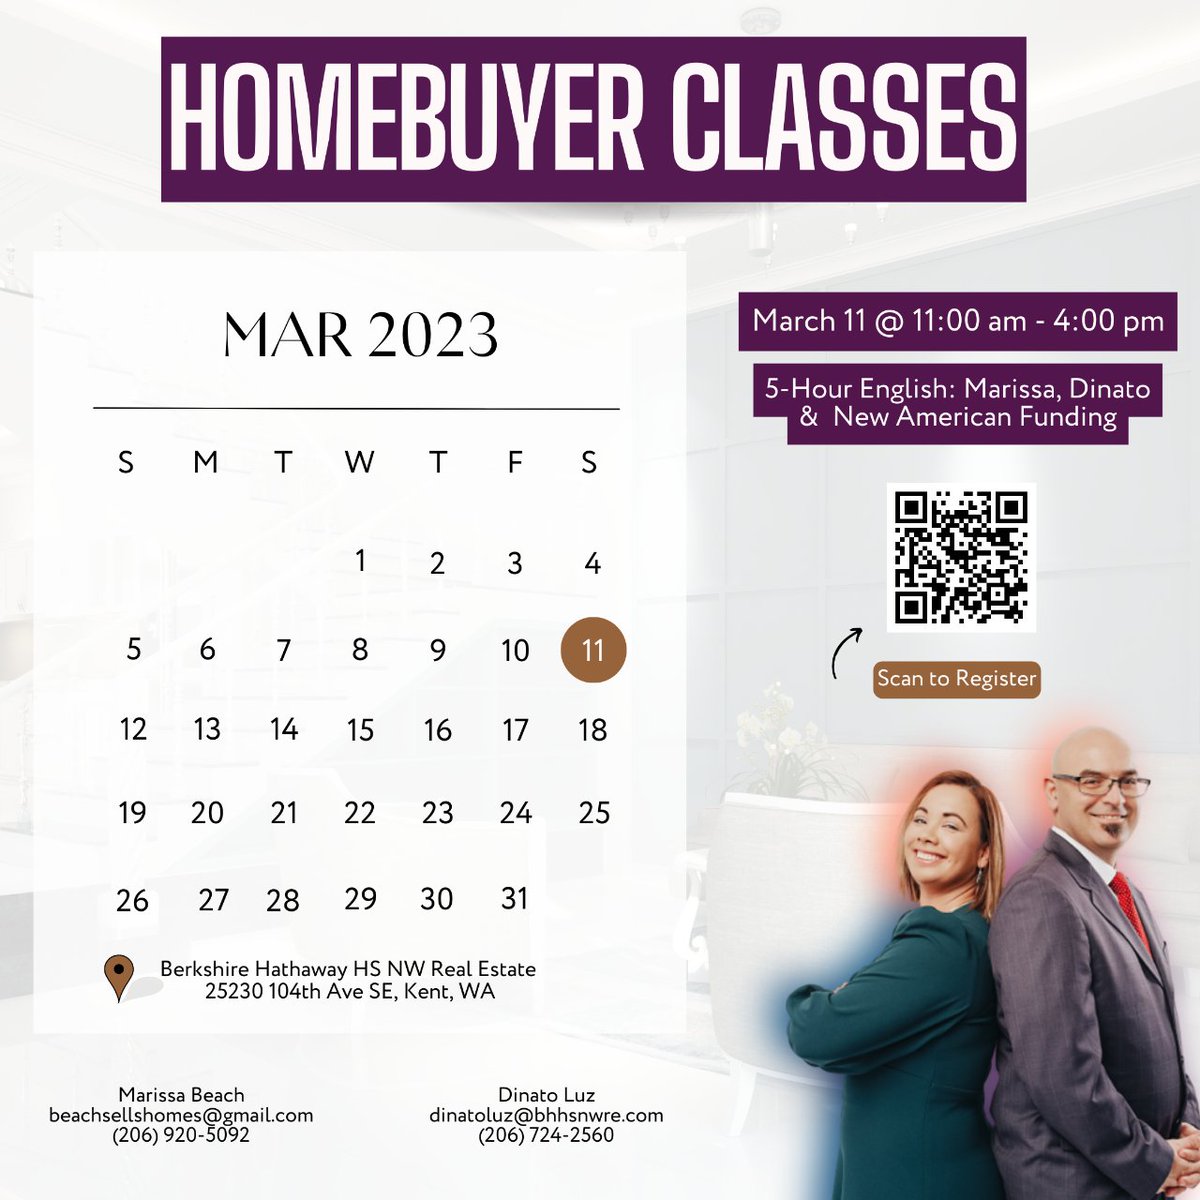 STOP doom-scrolling houses online. Buy a real house in person. 

Sign up for our FREE in person homebuyer classes at homebuyerclasses.org.

#homebuyerclass #homebuyingtips #homebuying101 #FirstTimeHomebuyer #HomeOwnership #homebuyingmadeeasy #homebuyingeducation